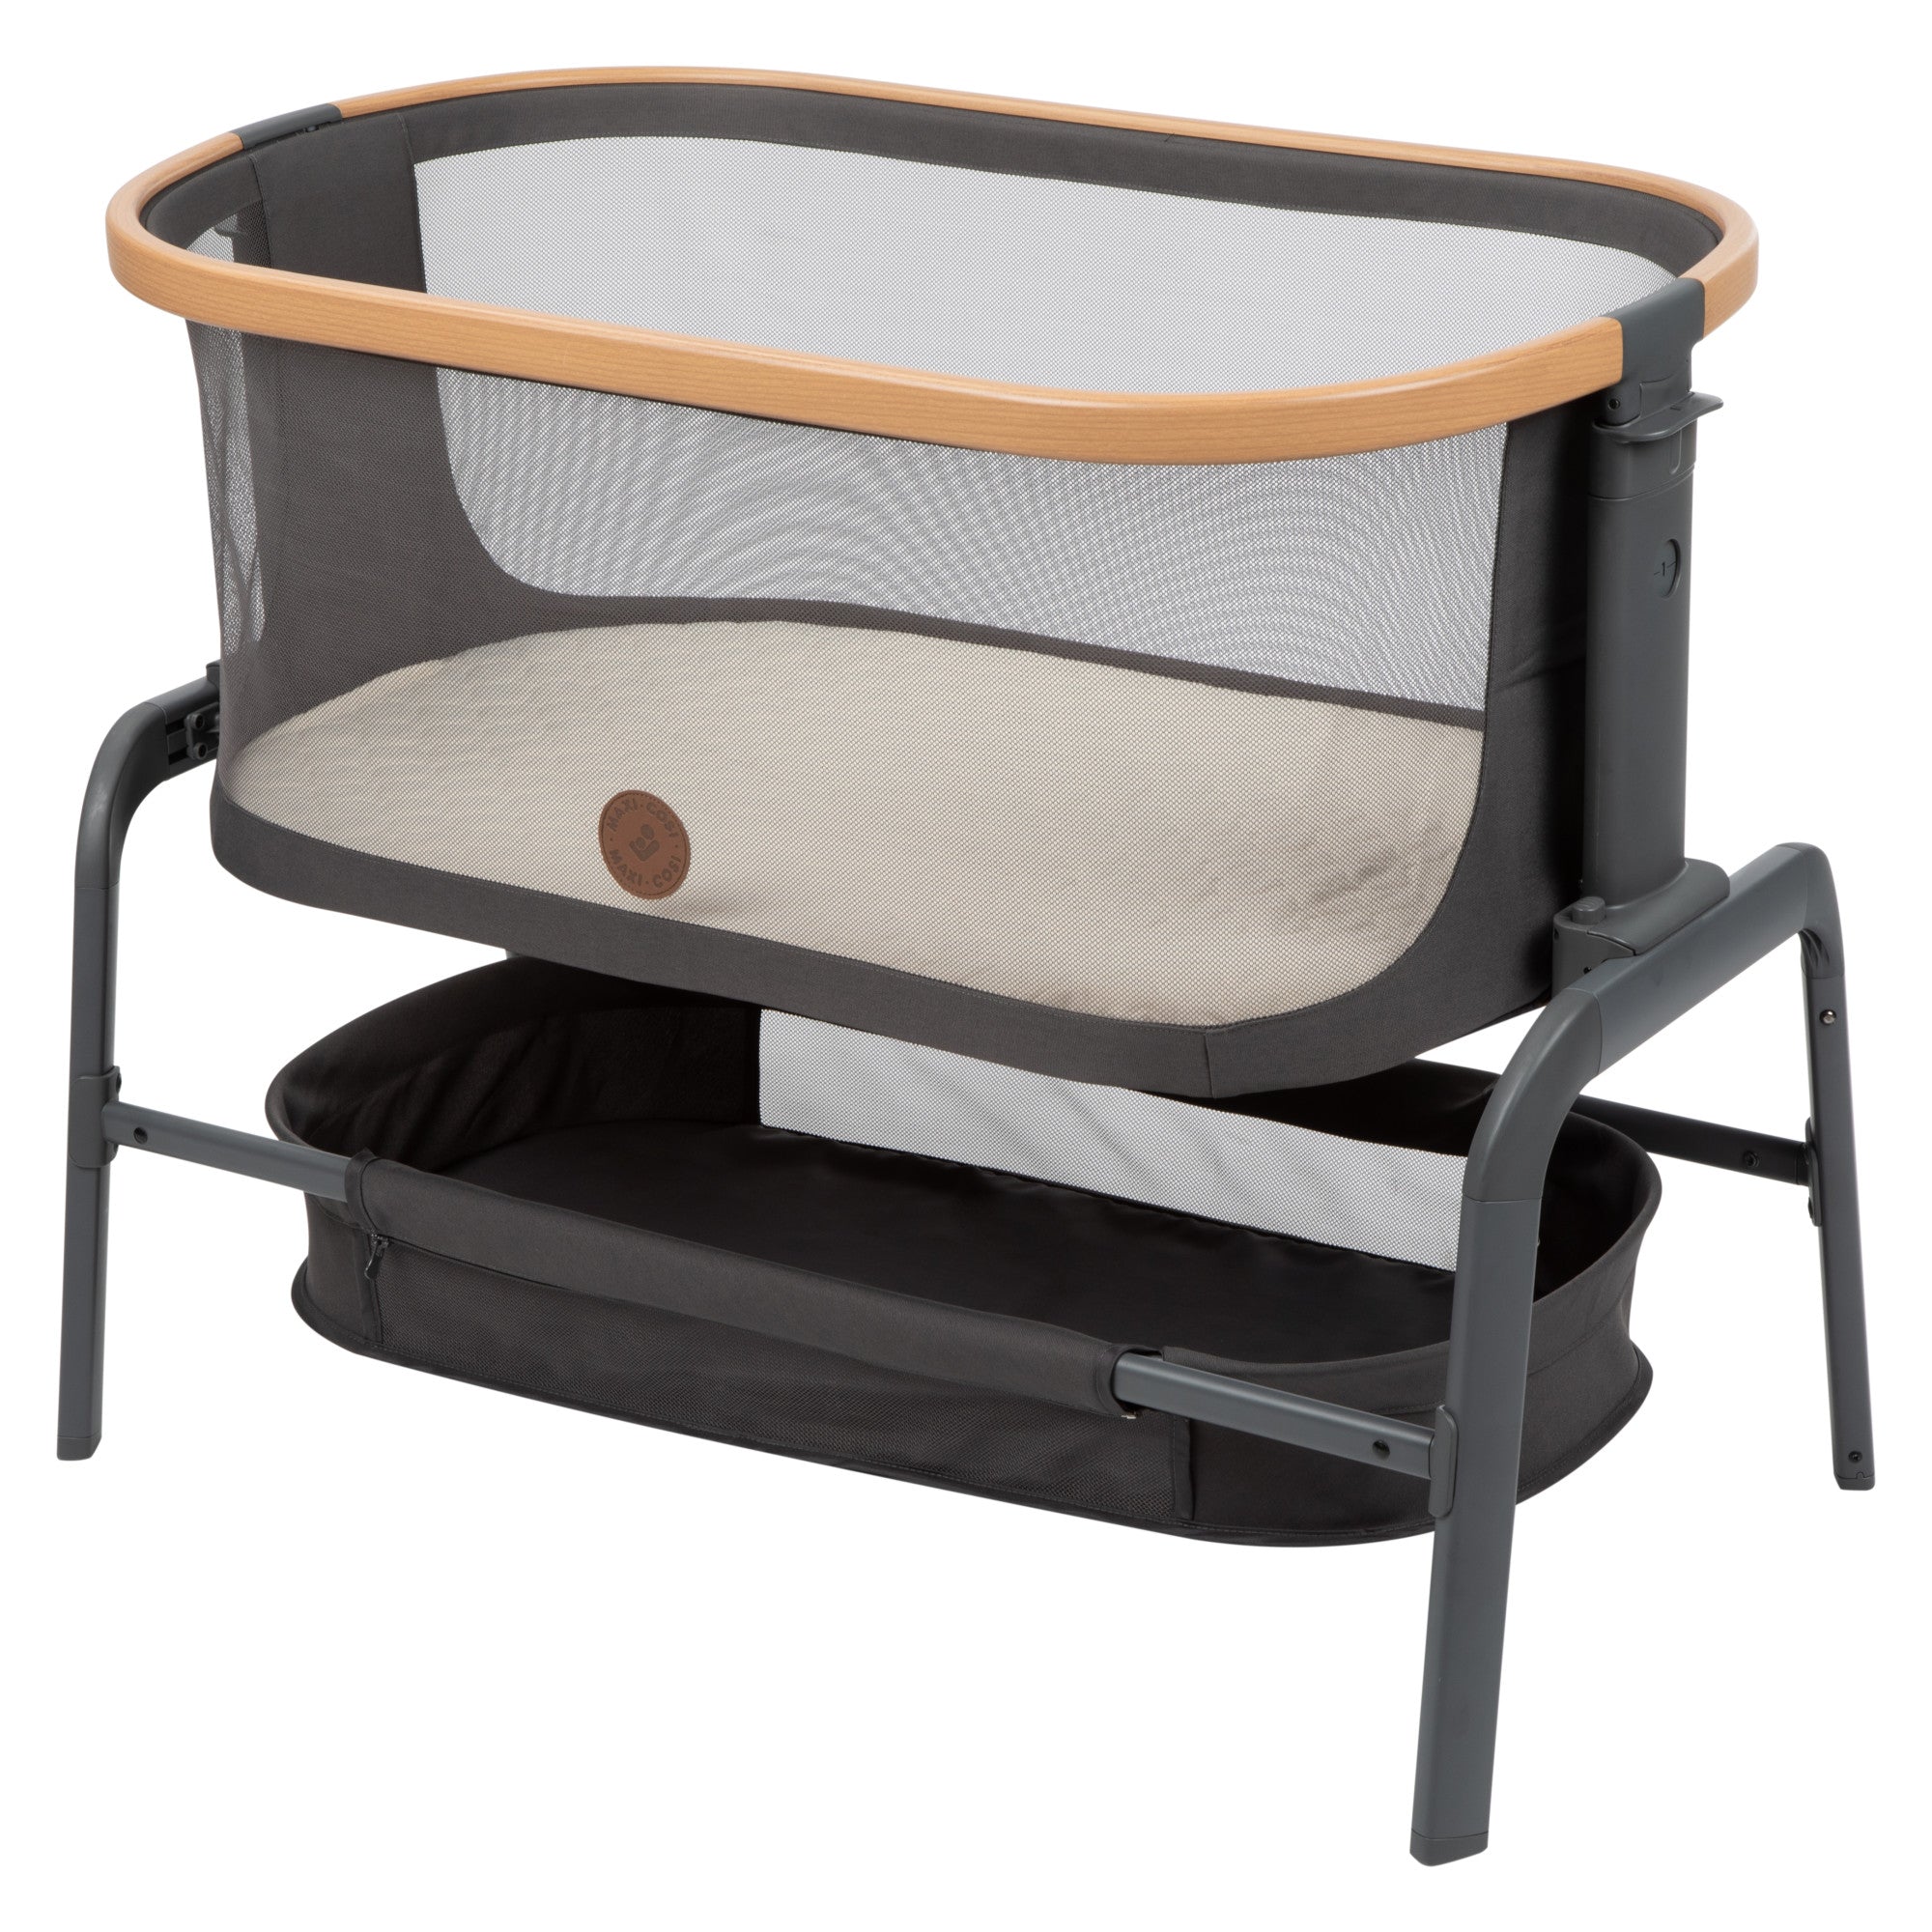 Iora Bedside Bassinet - Classic Oat - EcoCare - 45 degree angle view of left side